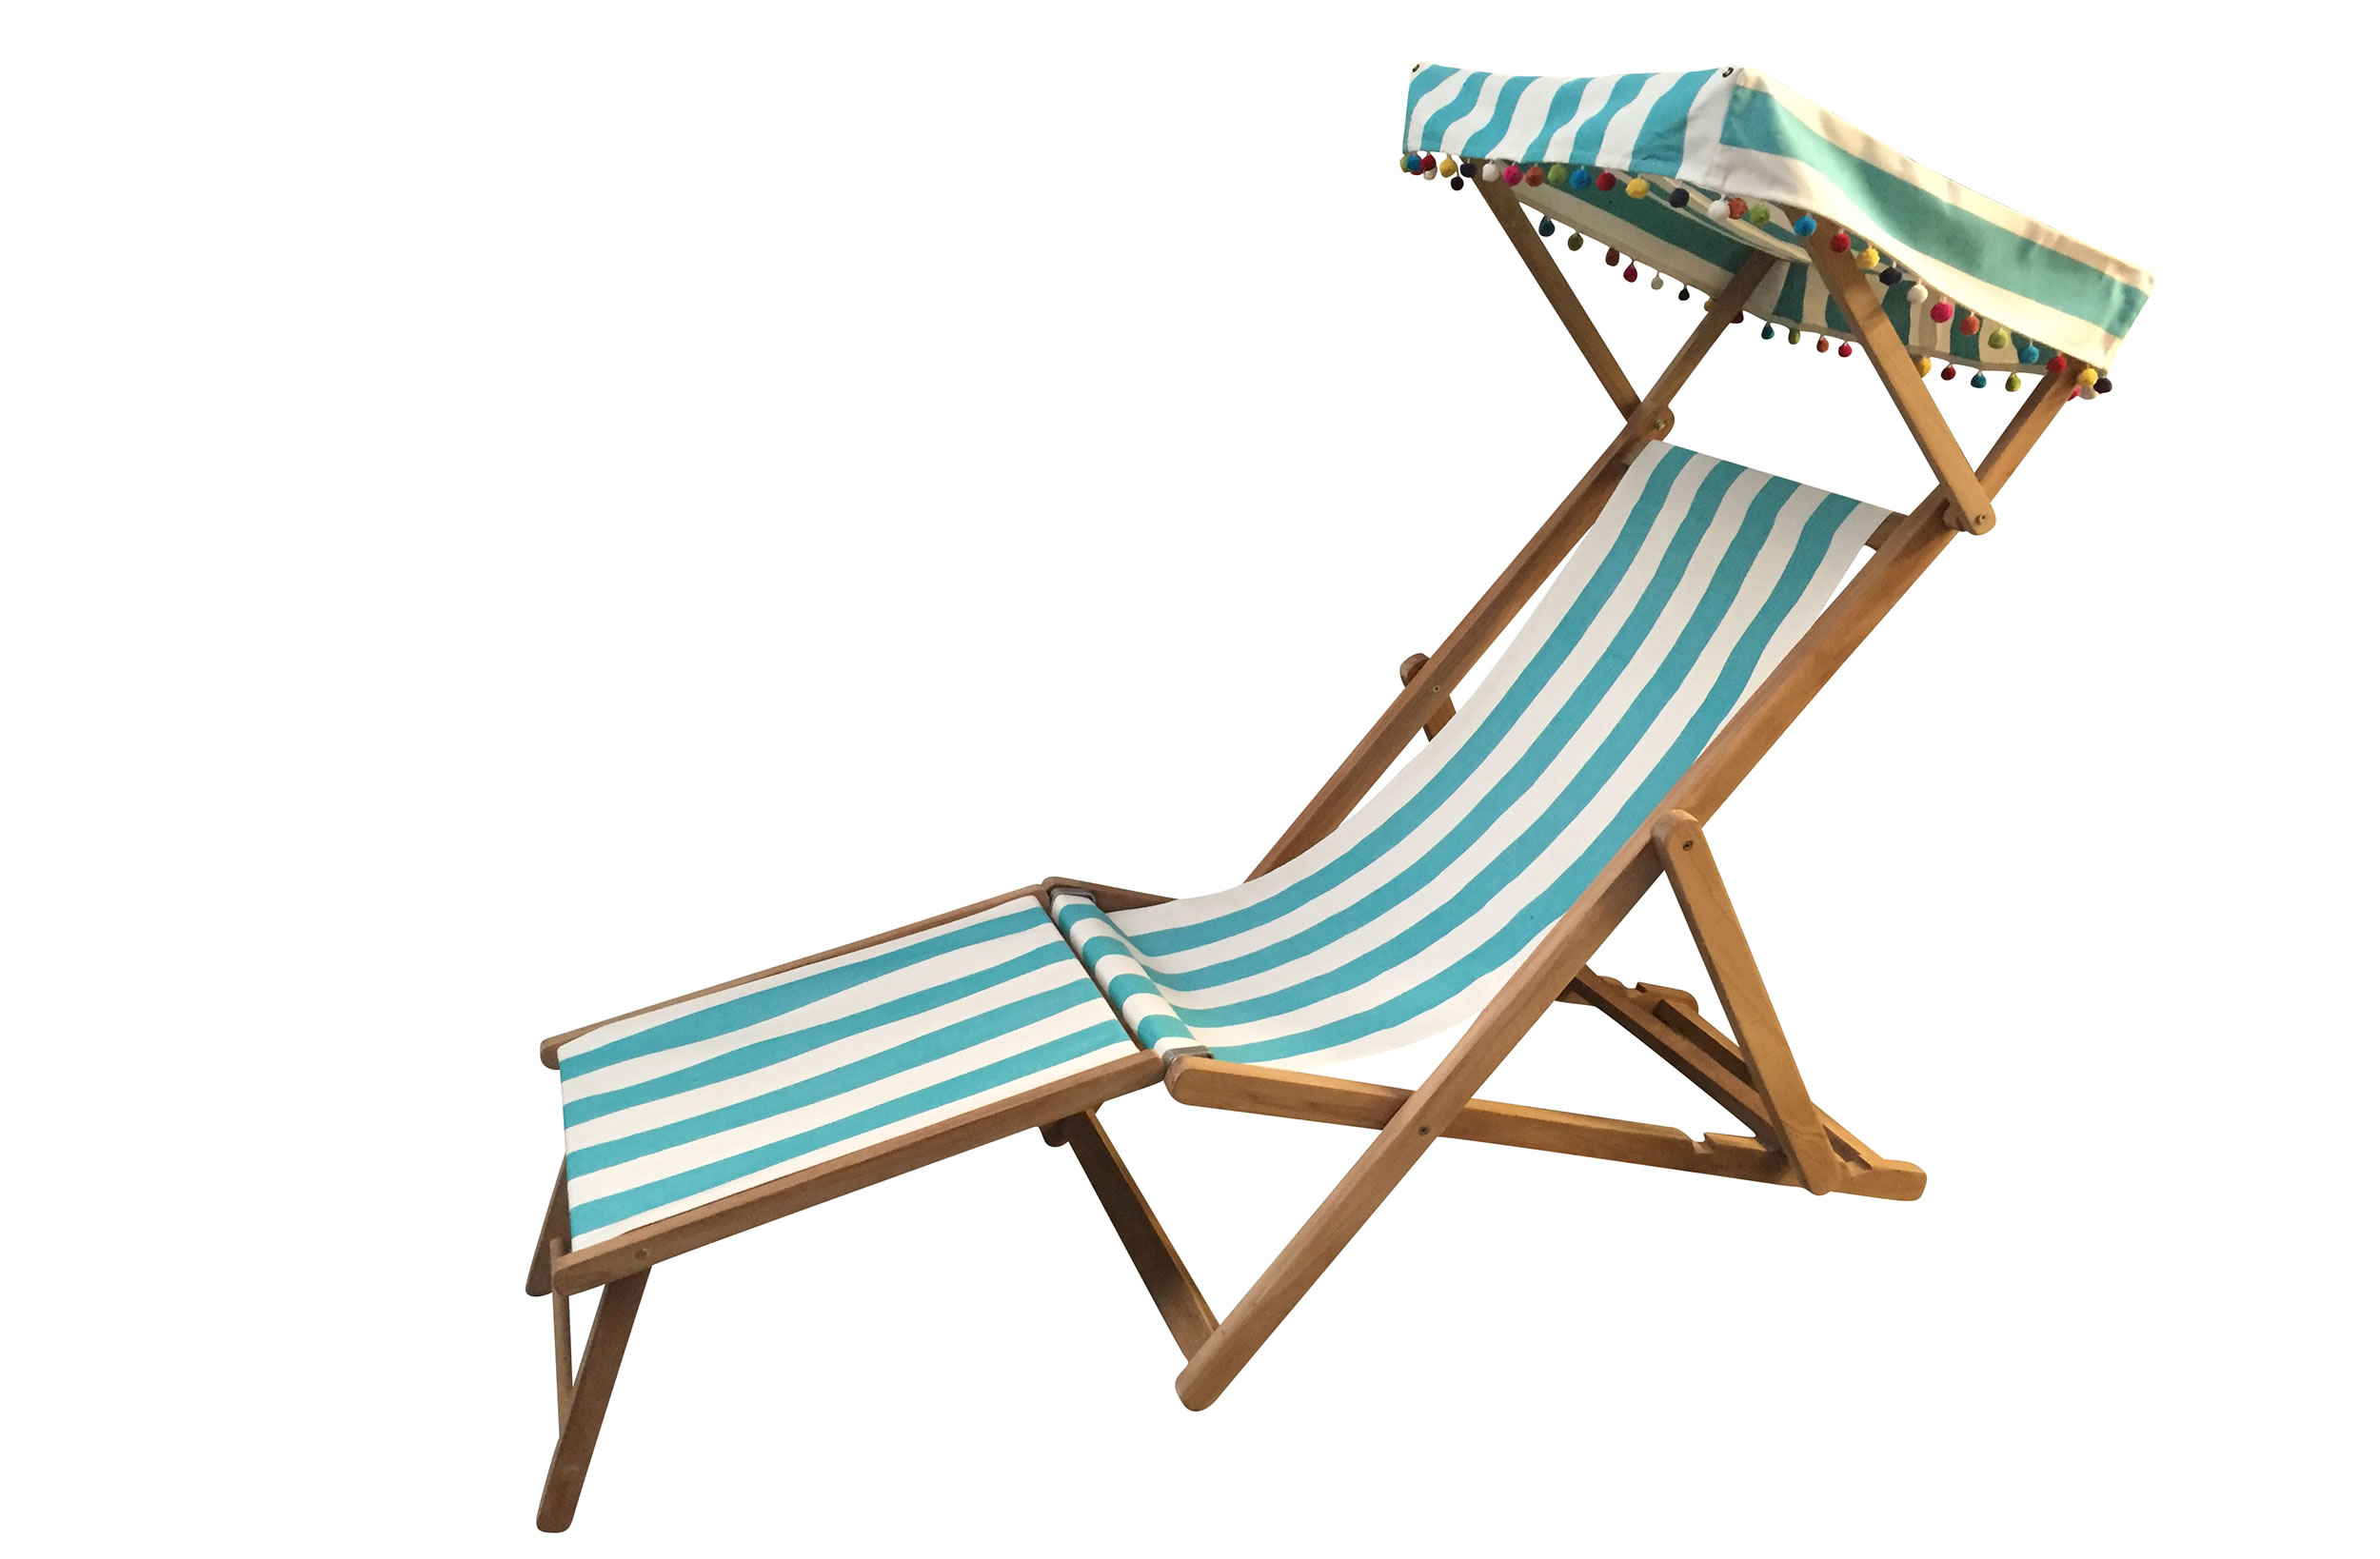 Turquoise and White Striped Edwardian Deckchairs with Canopy and Footstool